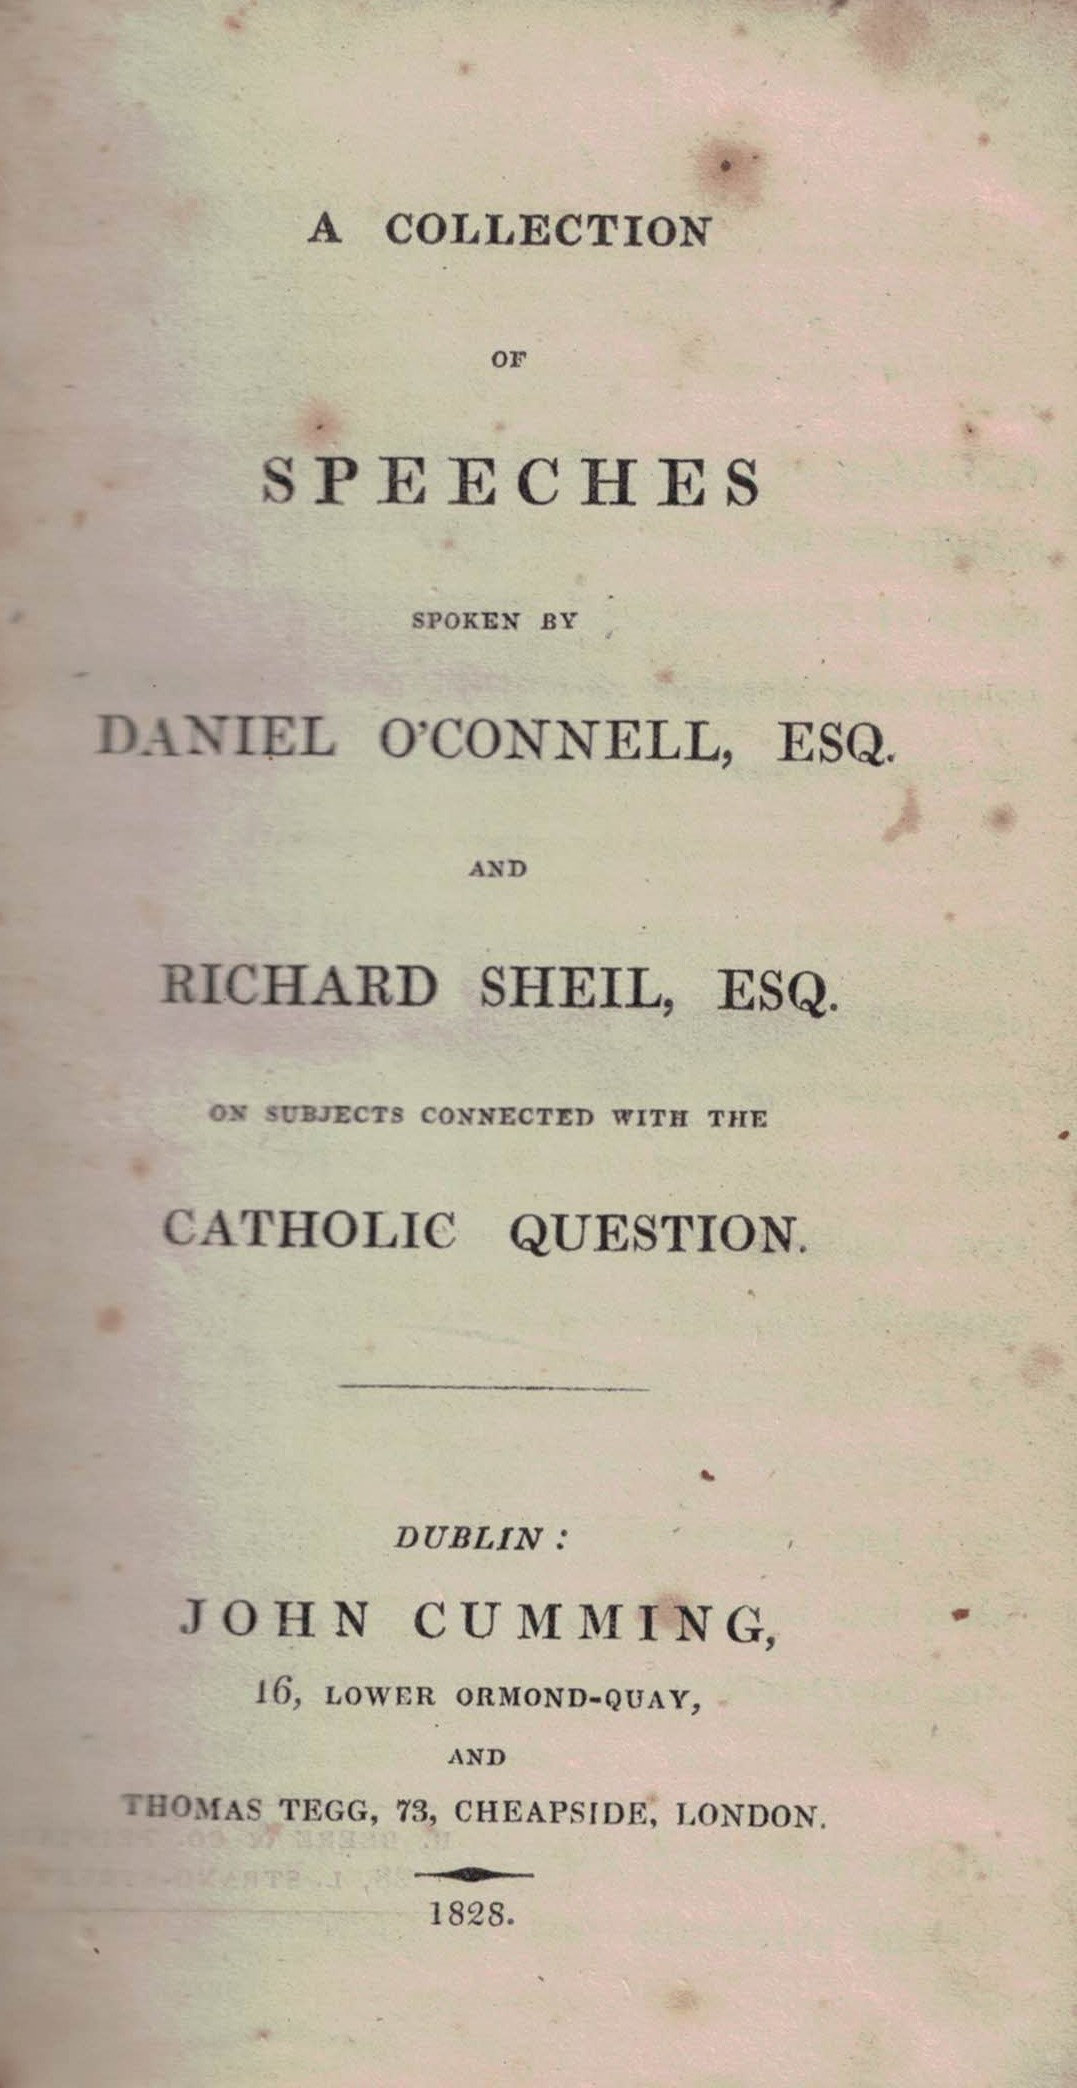 A Collection of Speeches Spoken by Dabiel O'Connell, Esq. and Richard Sheil, Esq. on Subjects Connected with the Catholic Question.